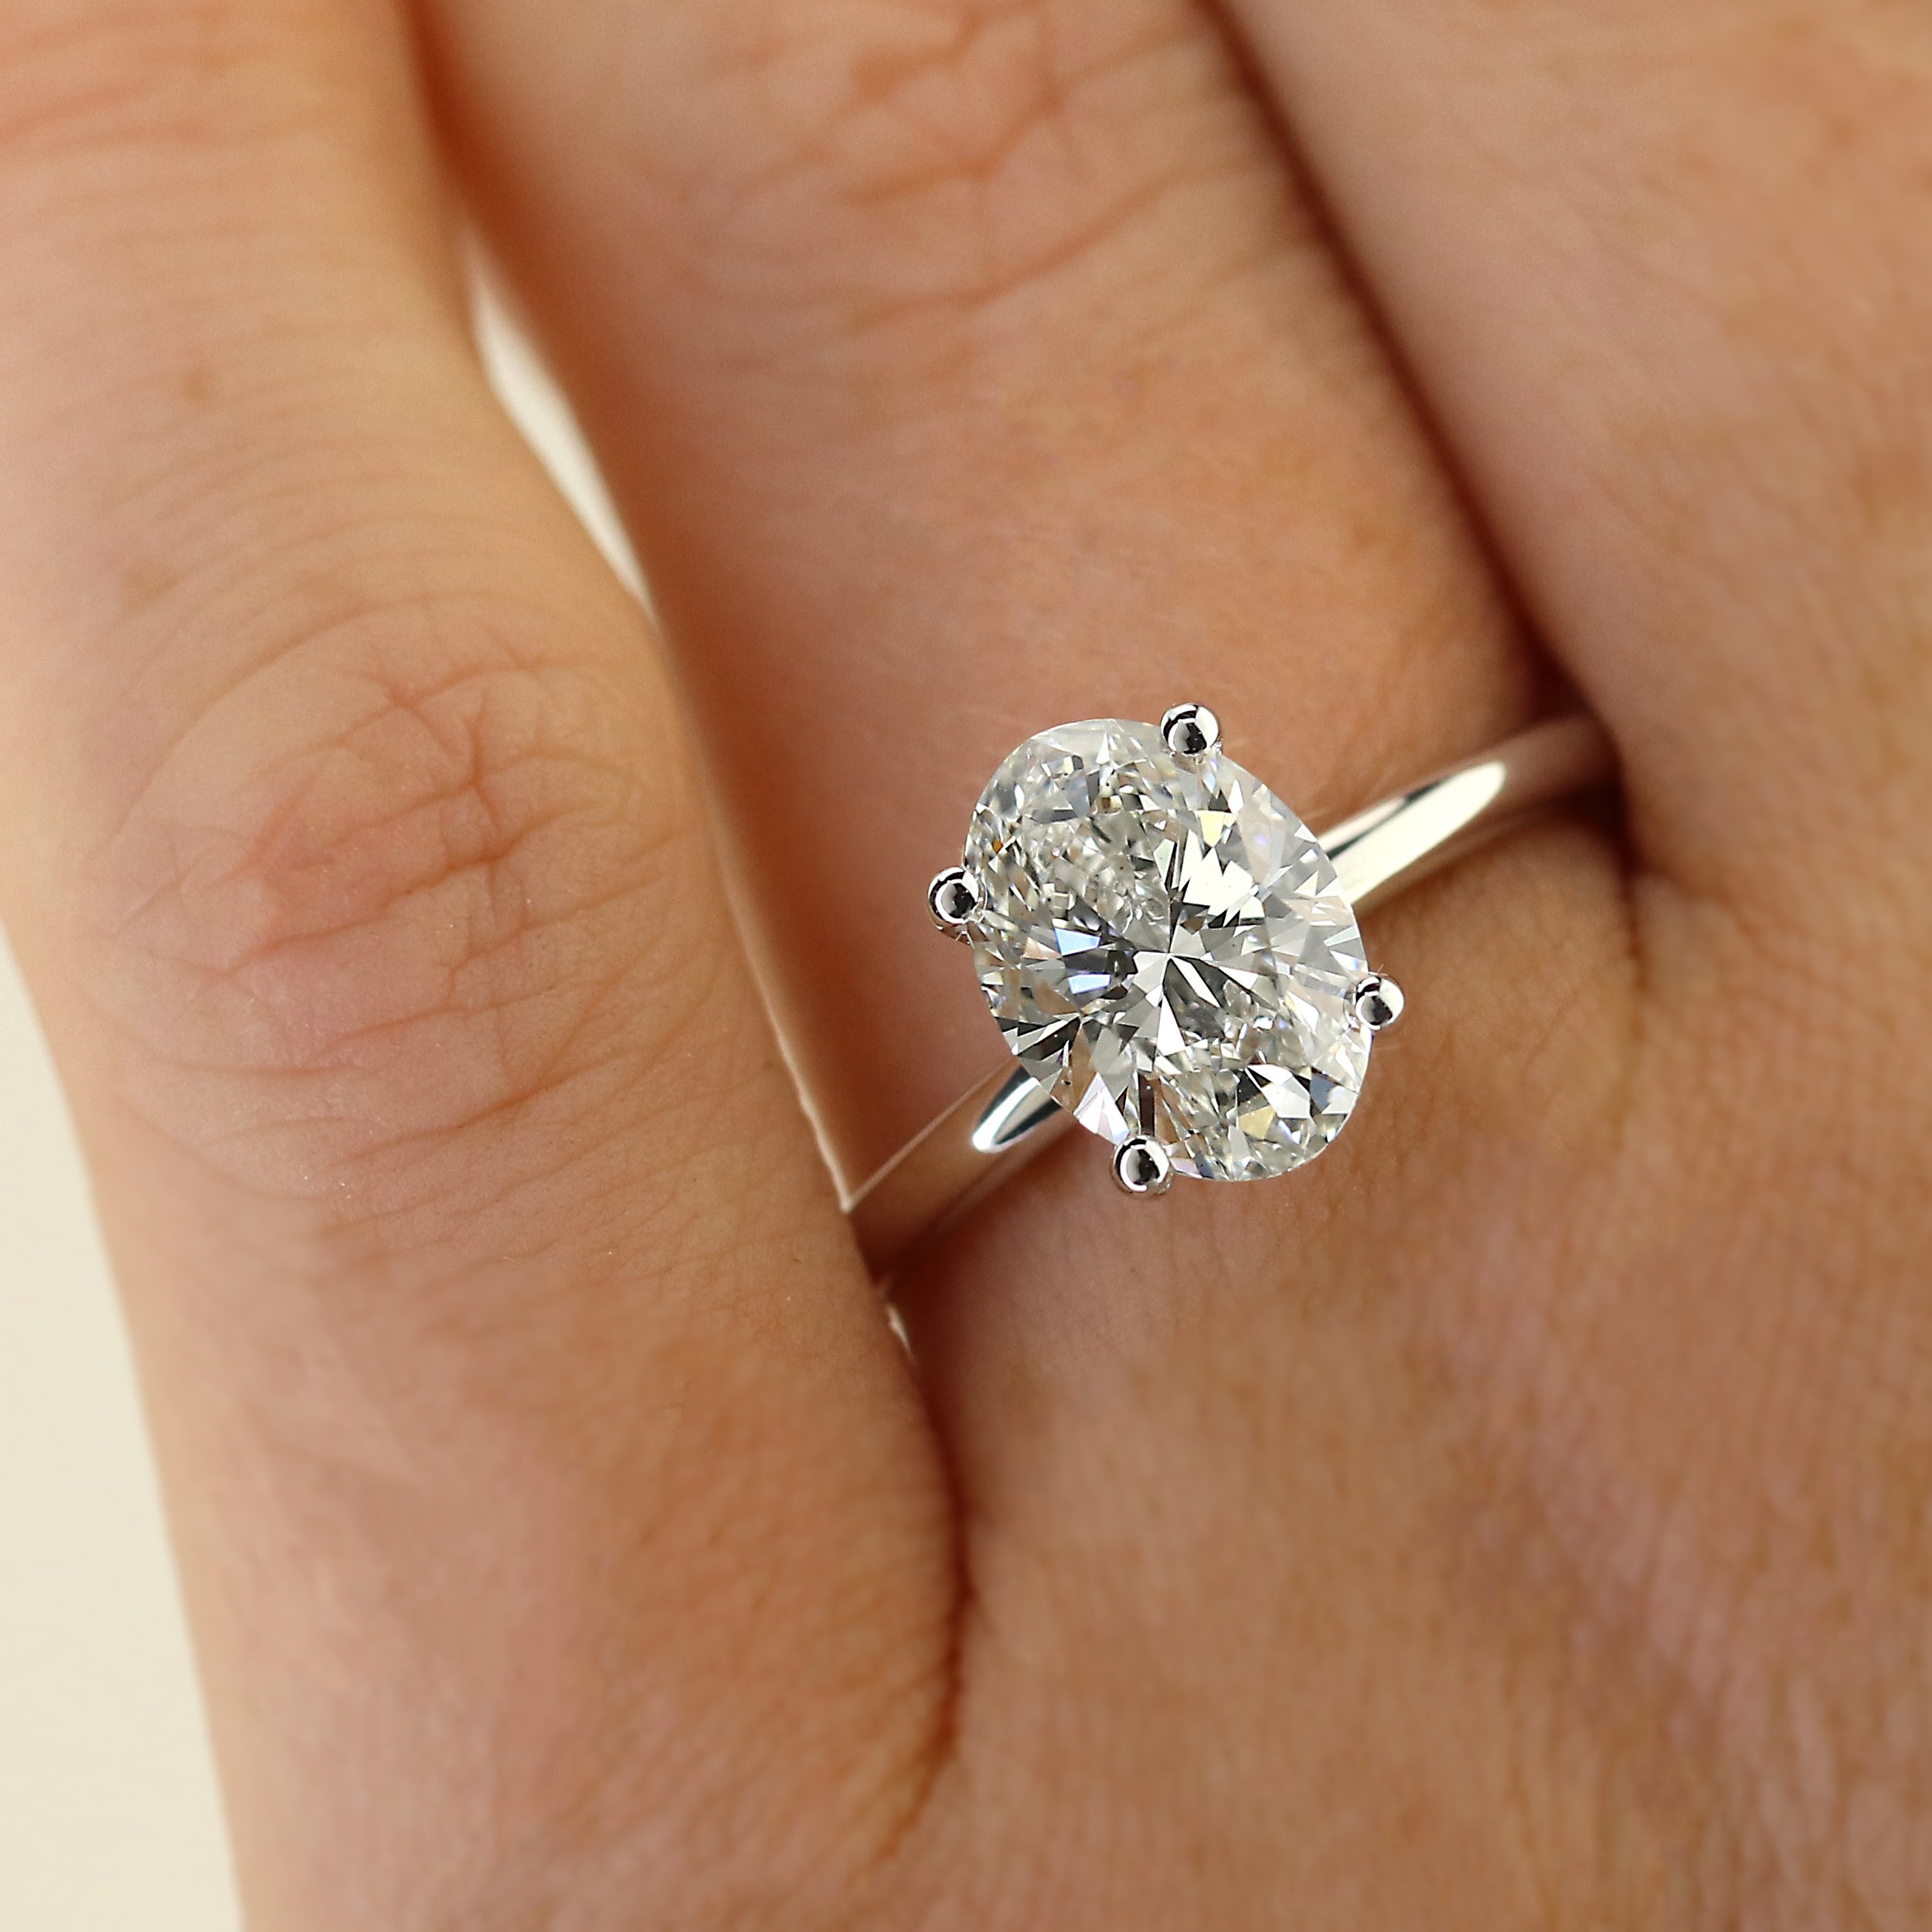 Why Simple Solitaire Rings Are Timeless and Most Valuable